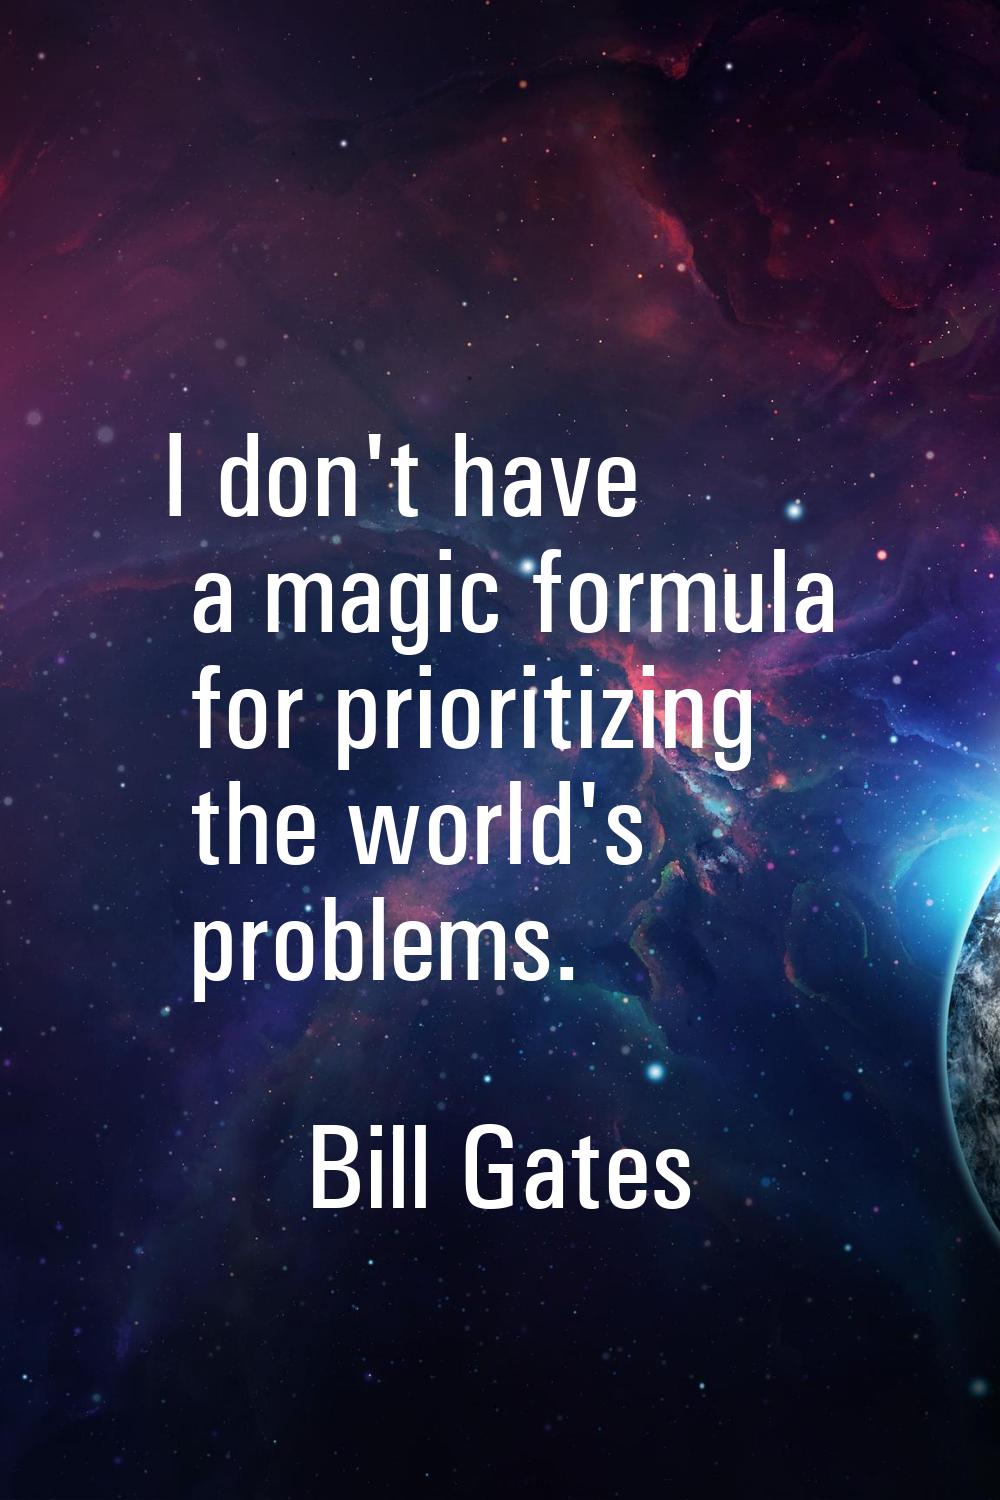 I don't have a magic formula for prioritizing the world's problems.